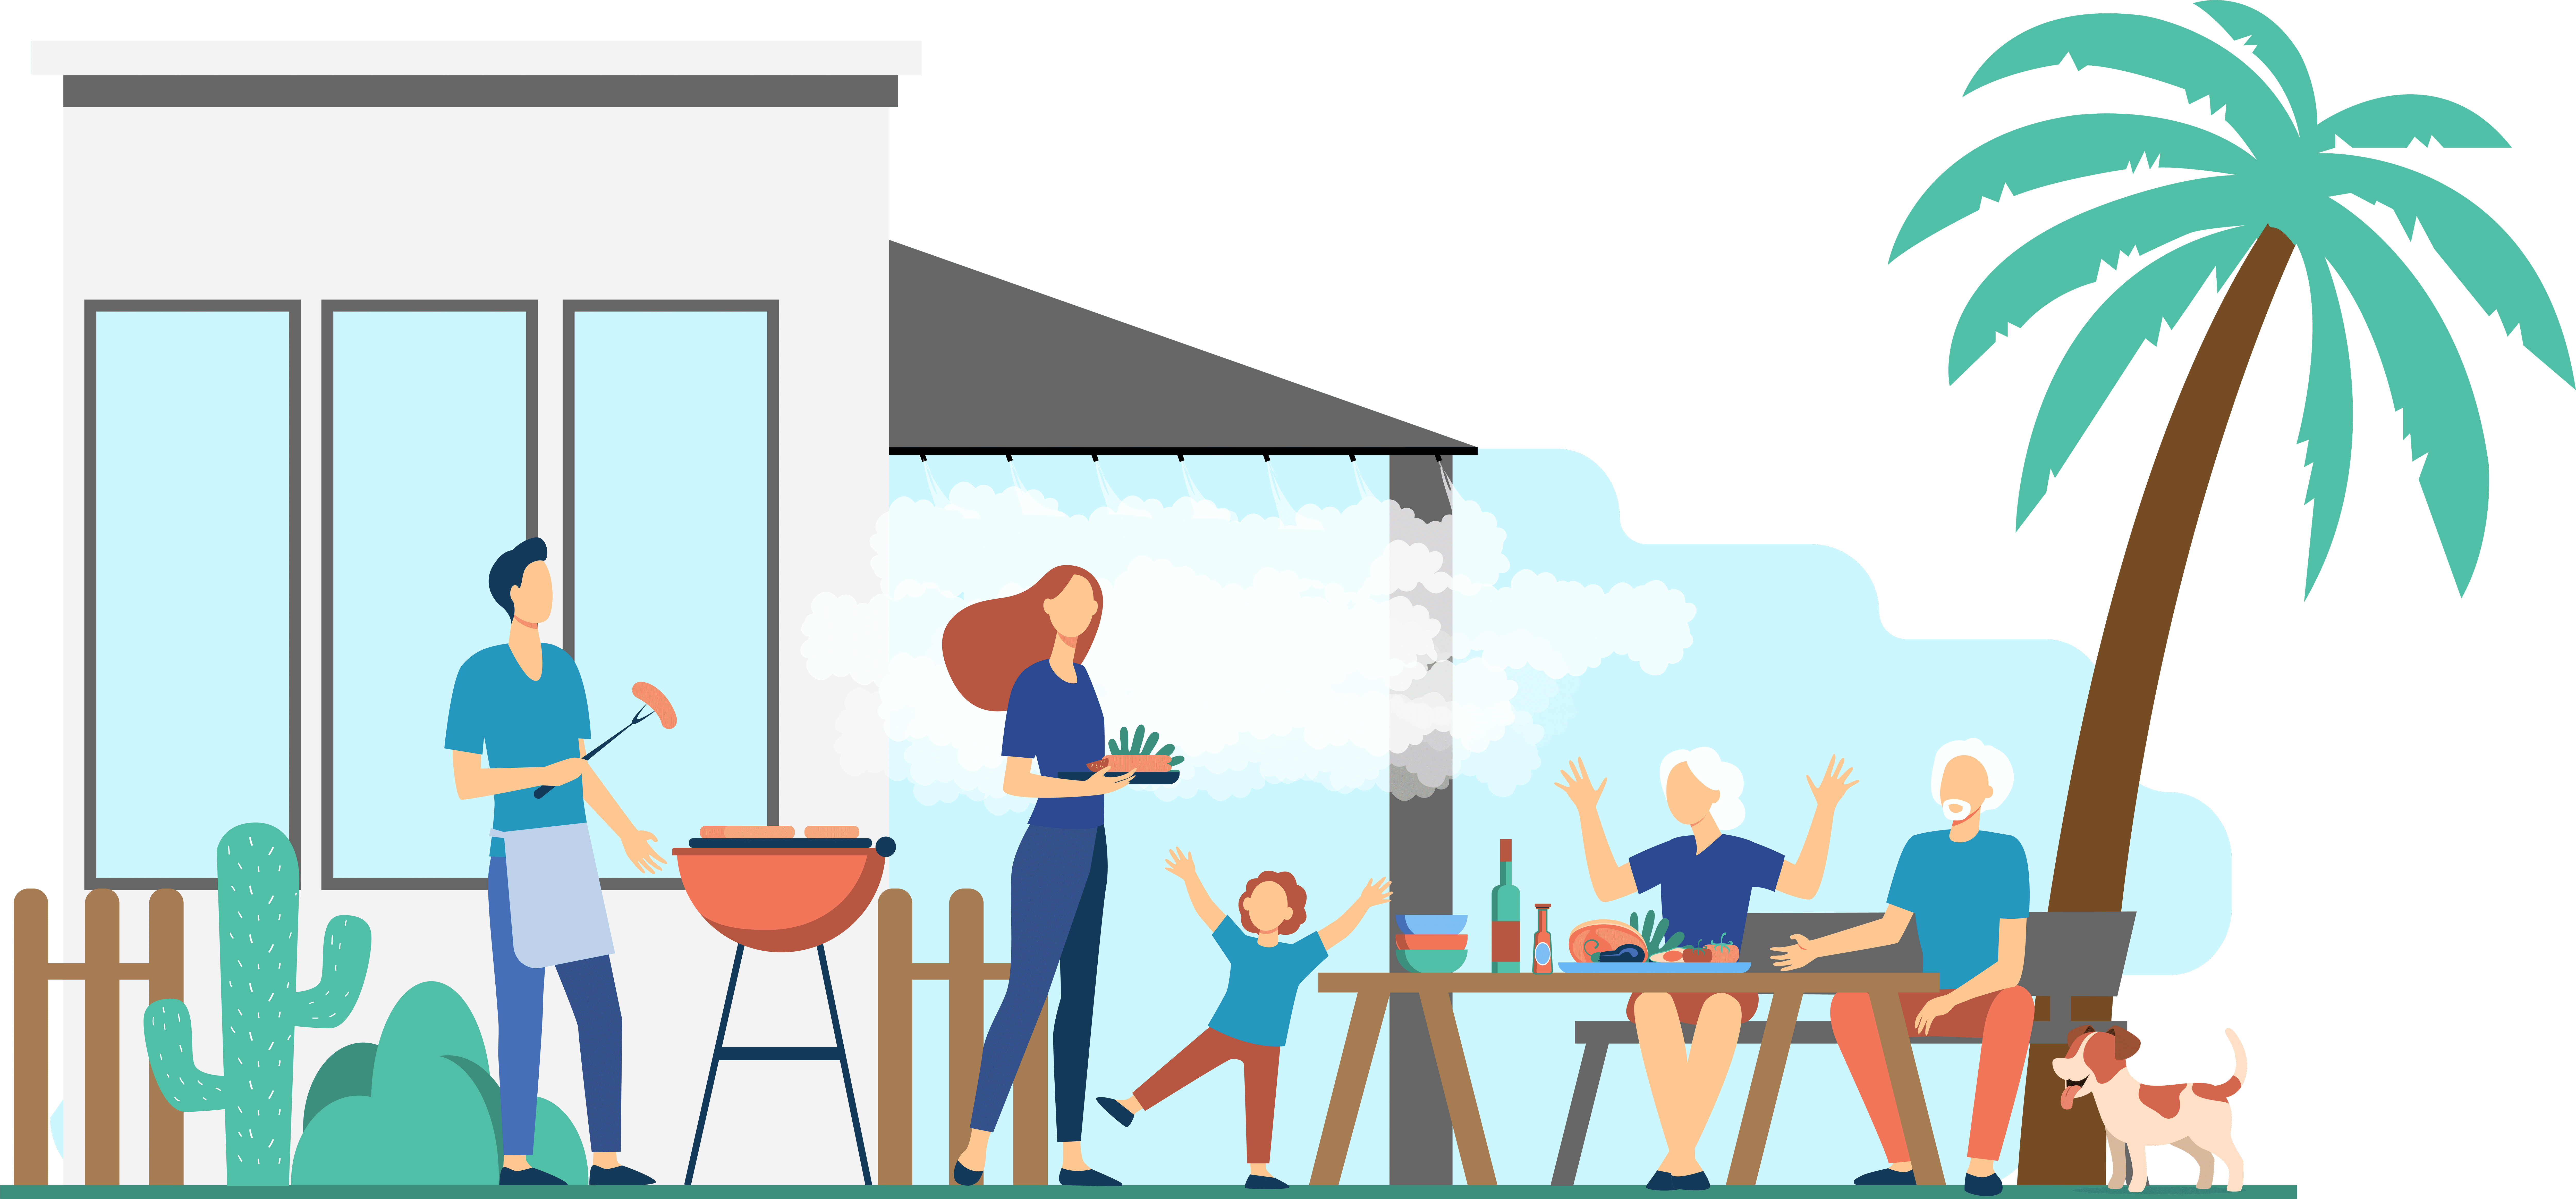 illustration of family in backyard with misting system